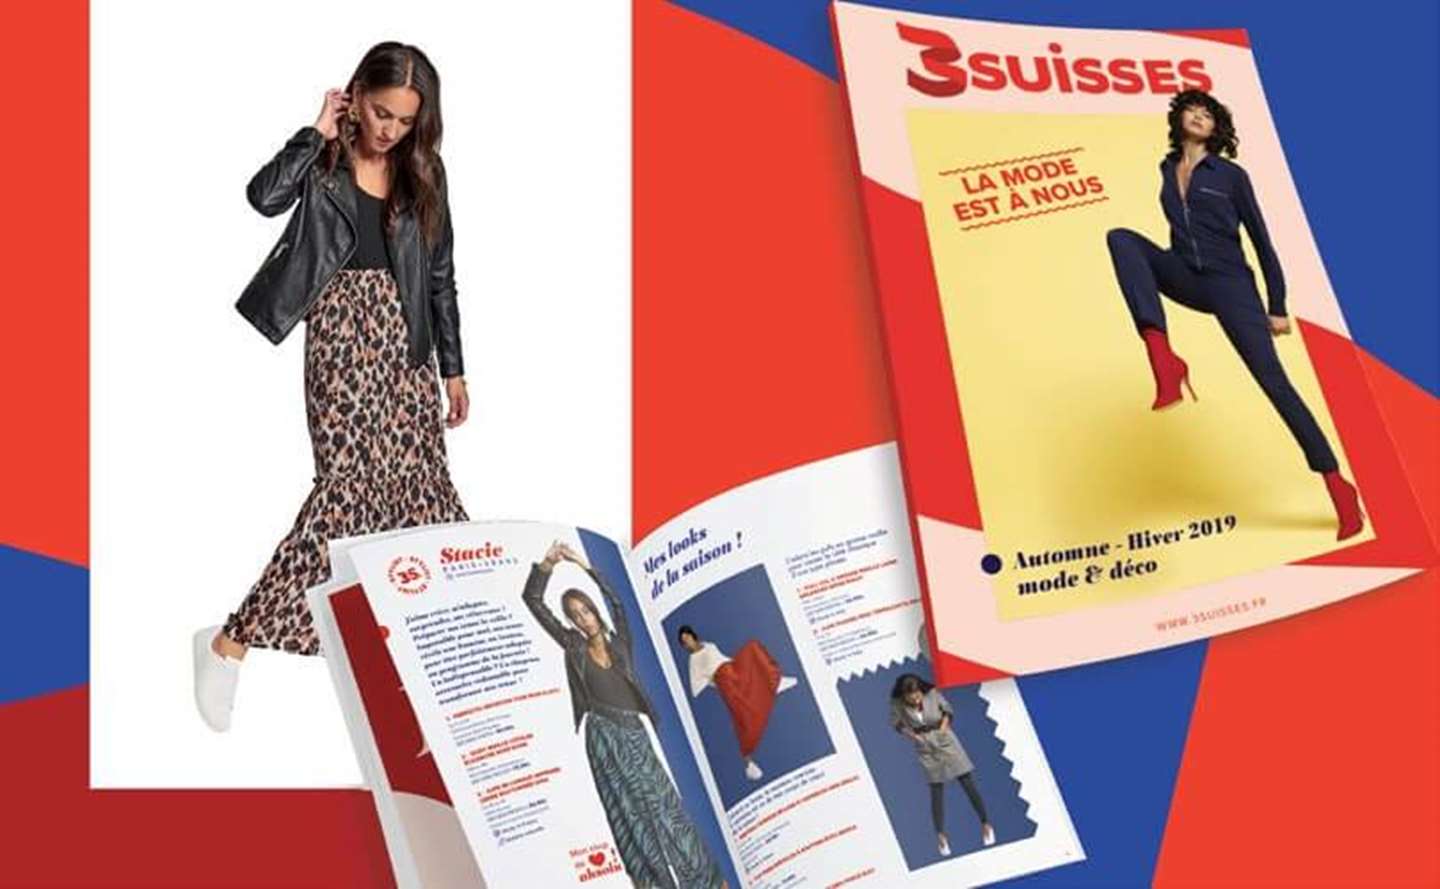 3suisses_catalogues_2020_cover.jpg